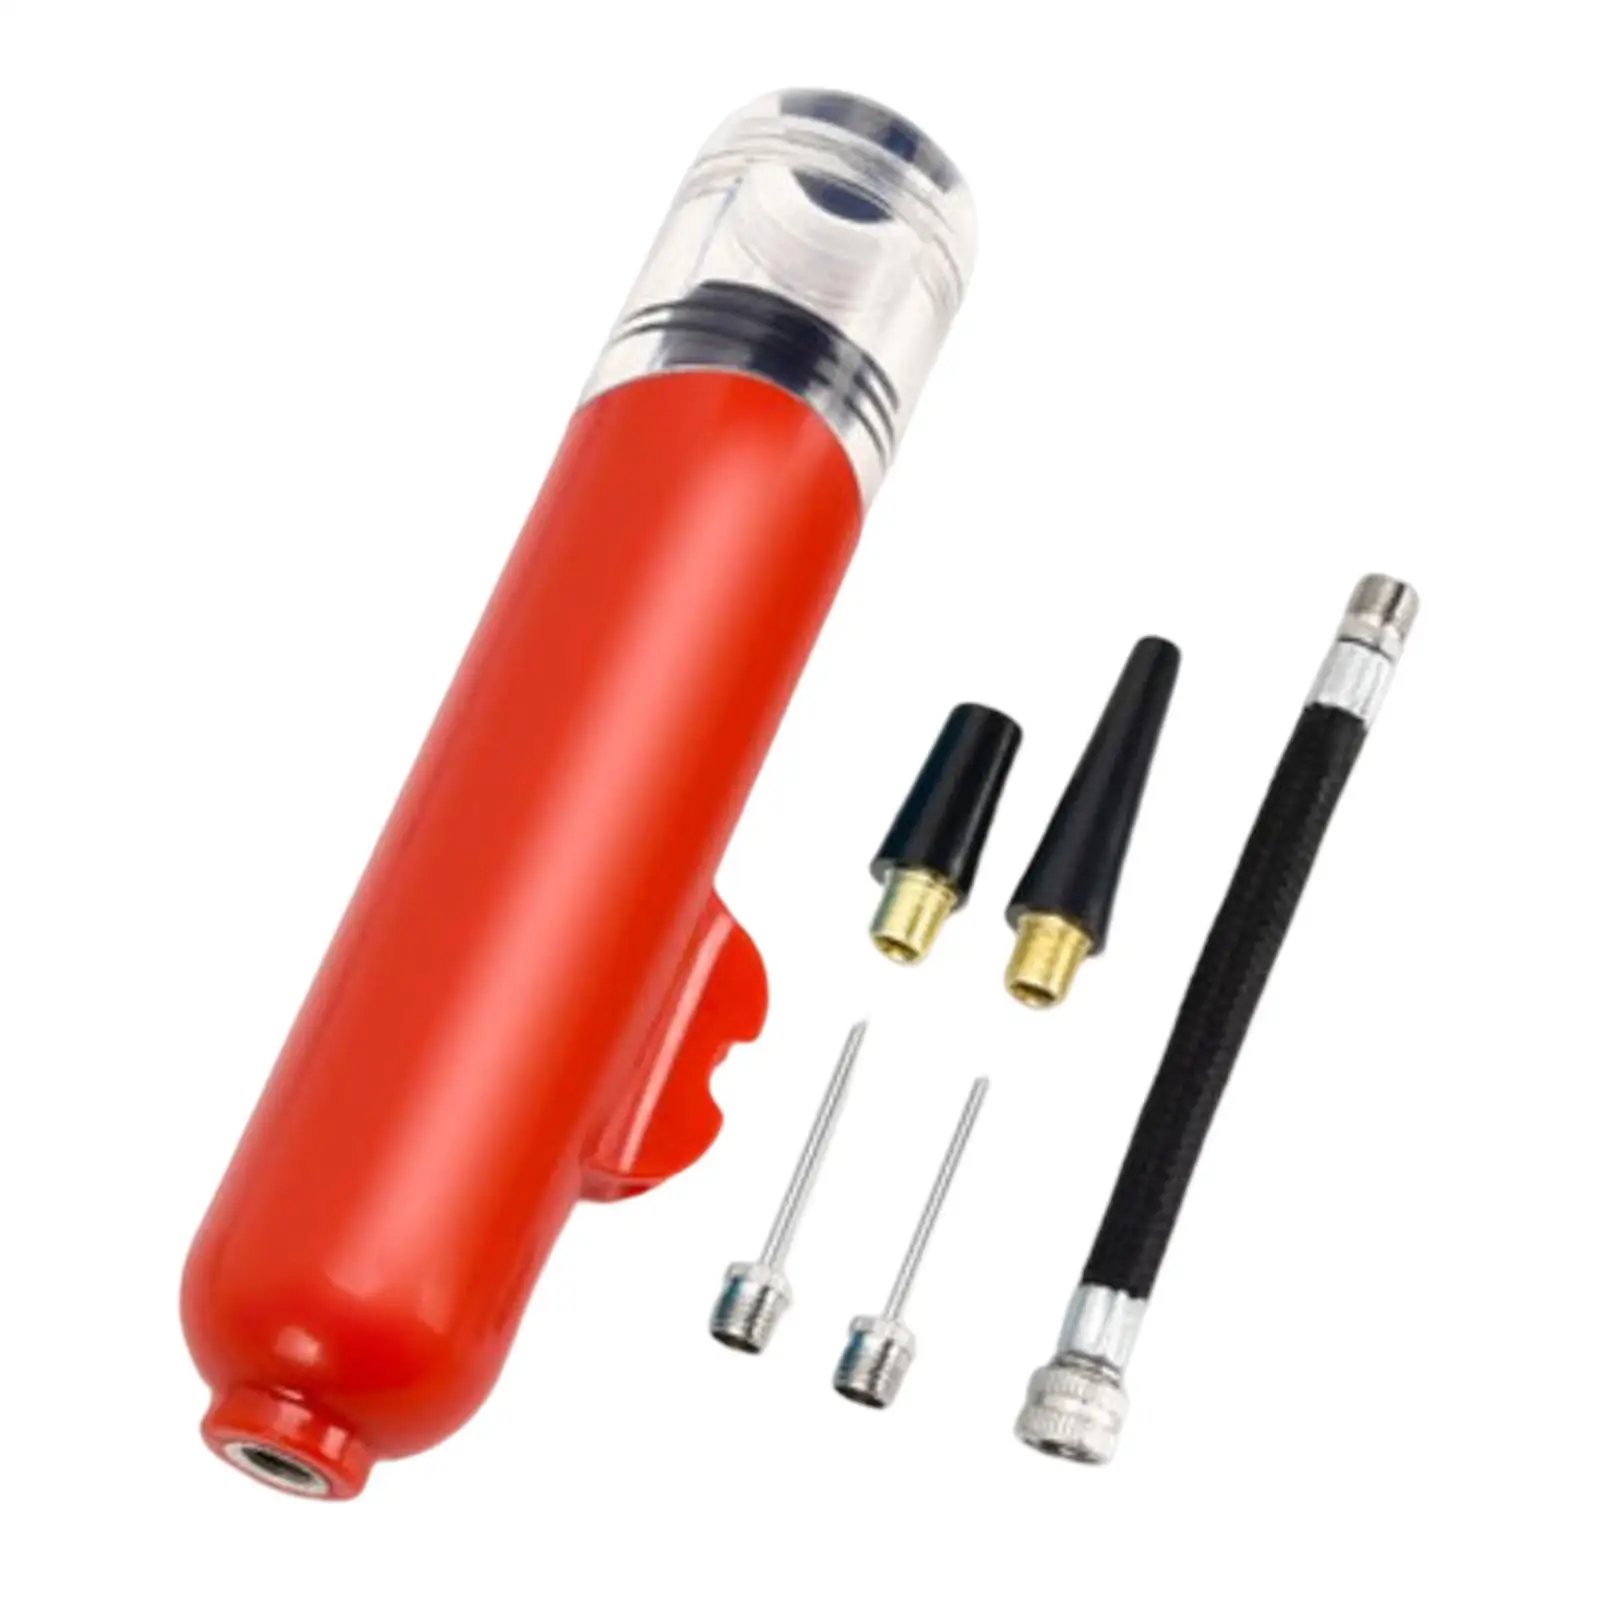 Mini Pump for Bike with Inflation Nozzles and Rubber Hose Compact Hand Pump